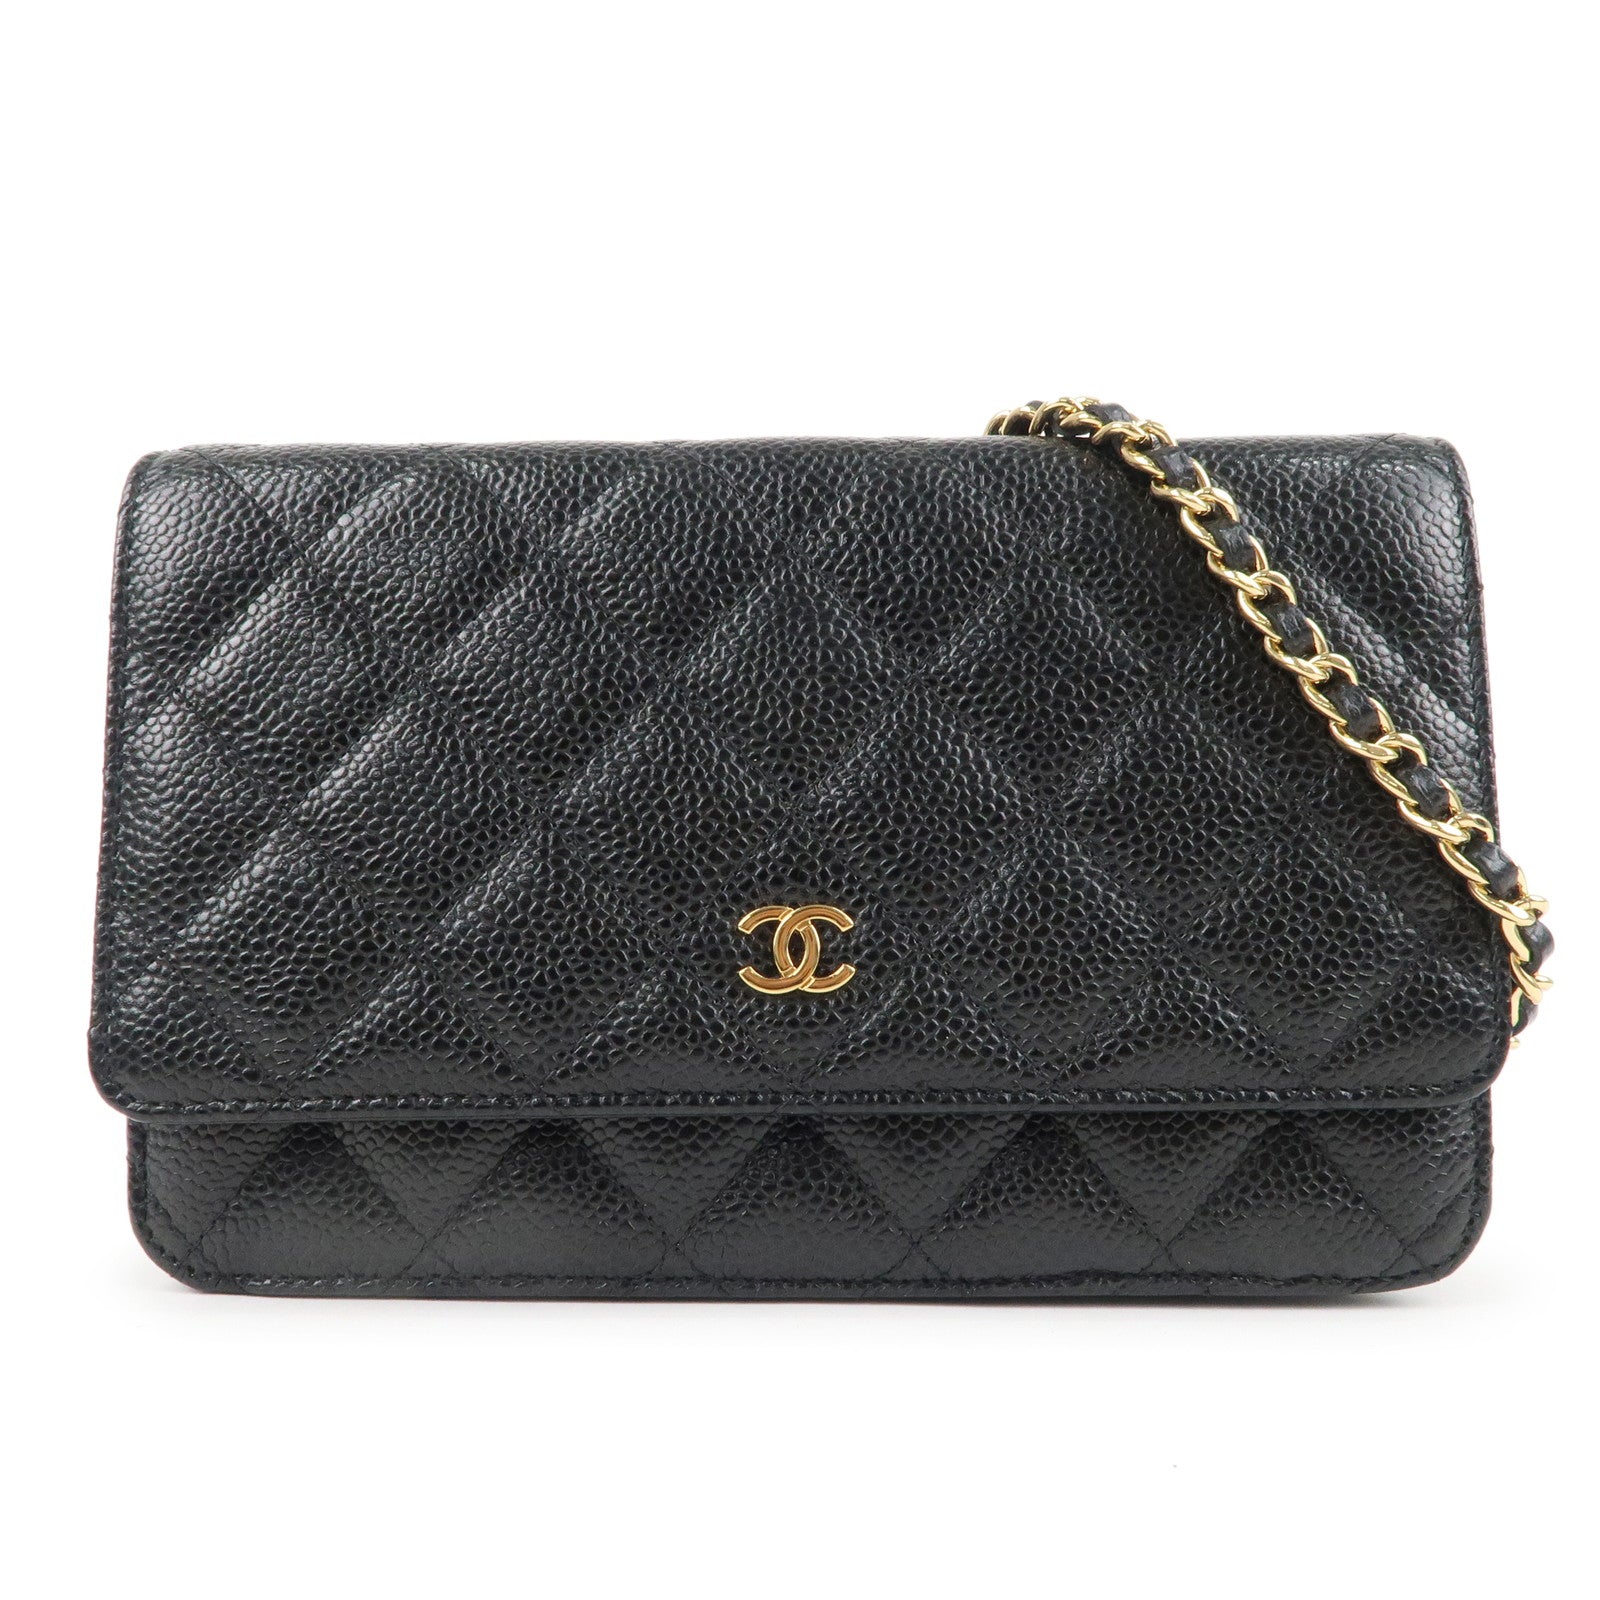 CHANEL, Bags, Nib Authentic Chanel Wallet On Chain Woc Black Caviar  Leather Gold Hardware